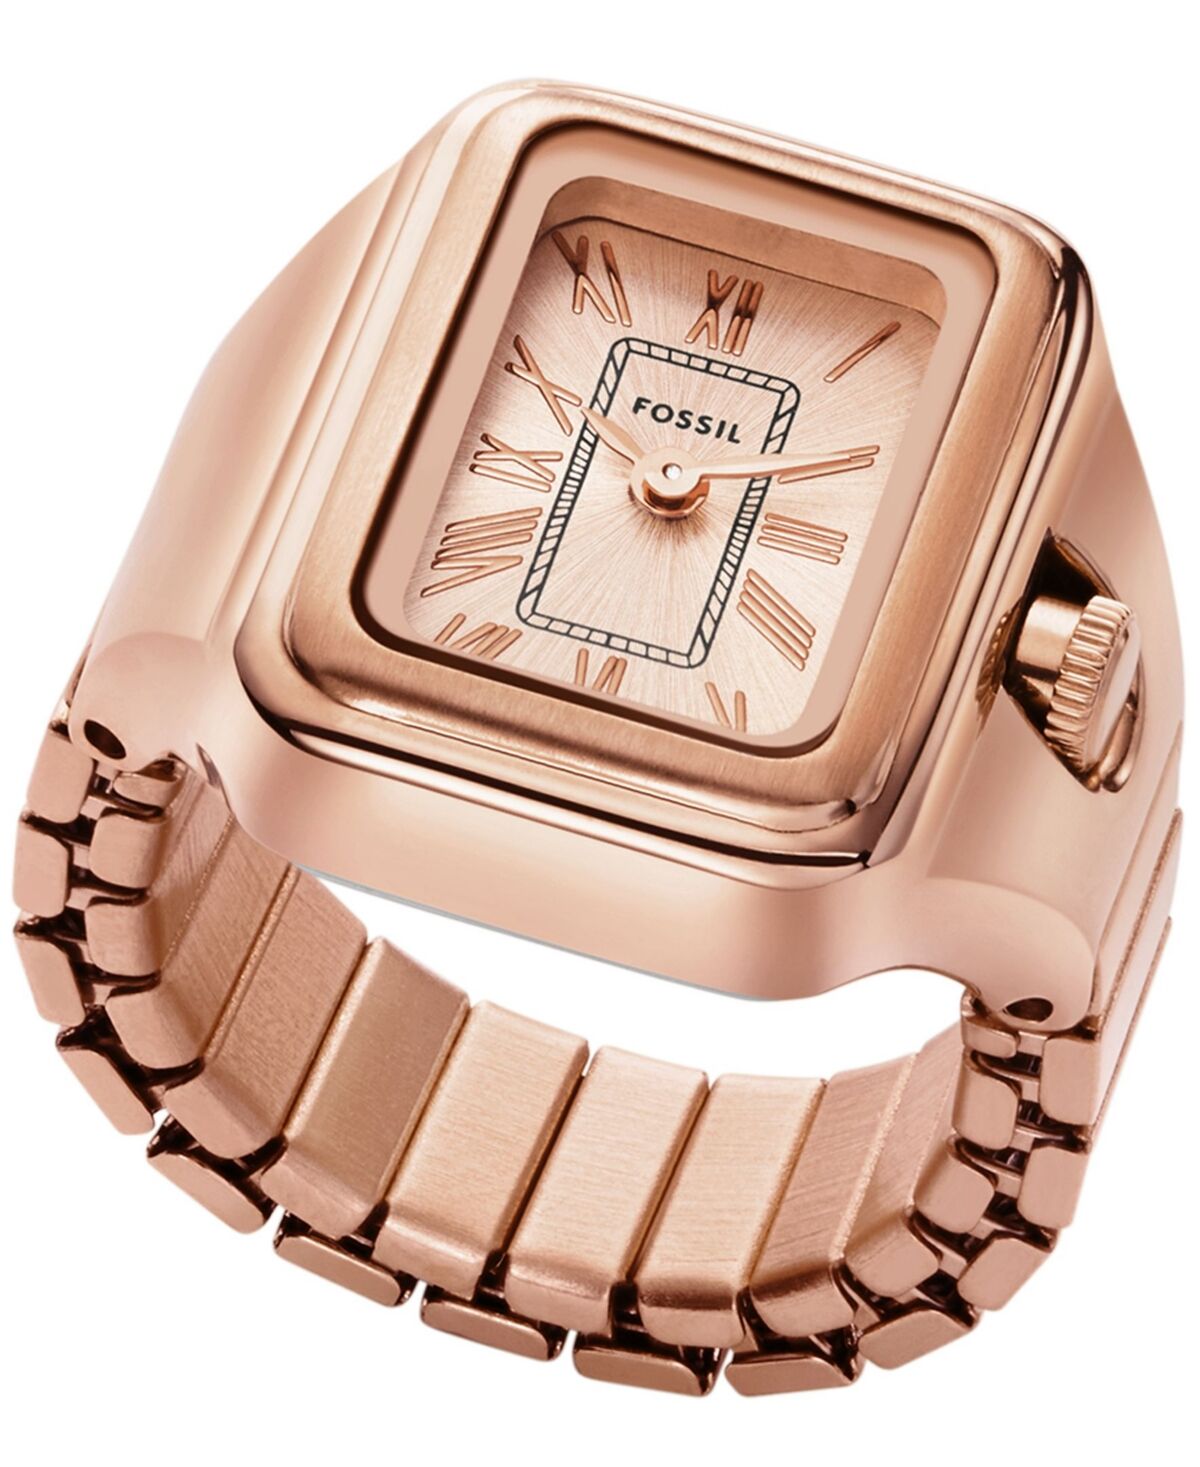 Fossil Women's Raquel Two-Hand Rose Gold-Tone Stainless Steel Ring Watch 14mm - Rose Gold-Tone